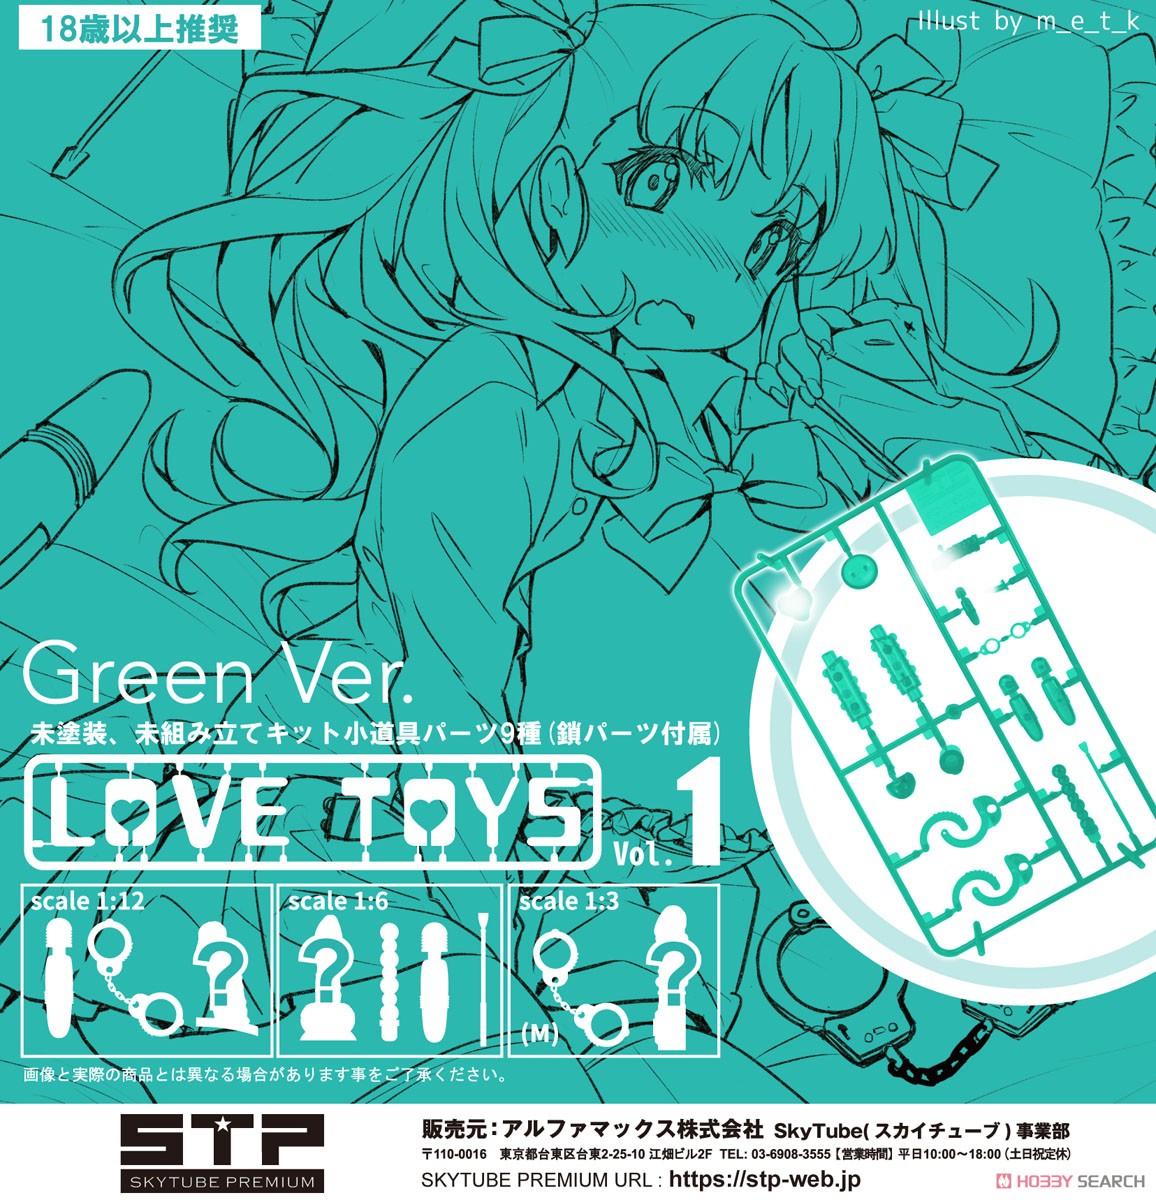 LOVE TOYS Vol.1 Green Ver. (組立キット) 商品画像3